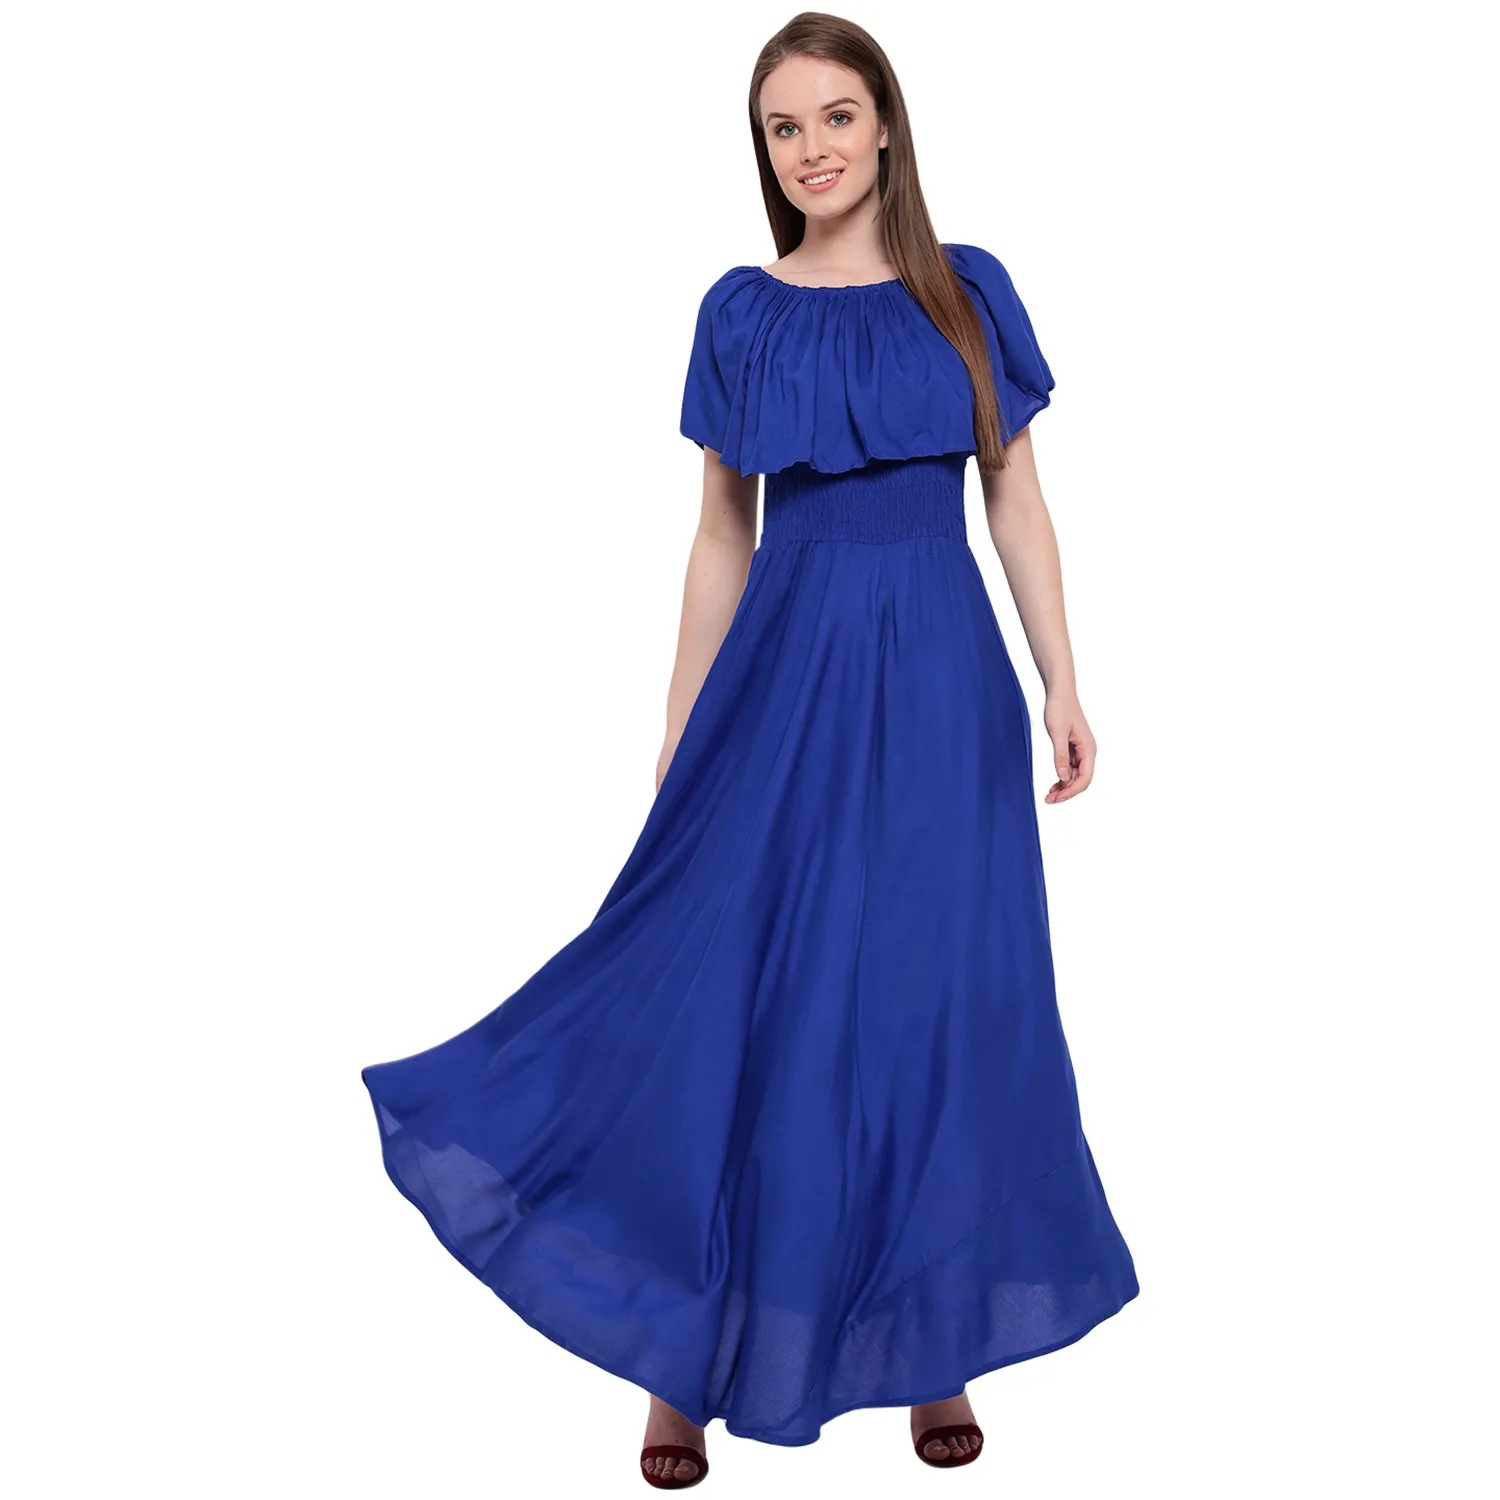 Women's Fit and Flare Solid Rayon Royal Blue Ruffle Frill Smoked Sleeveless Gown (AM084)